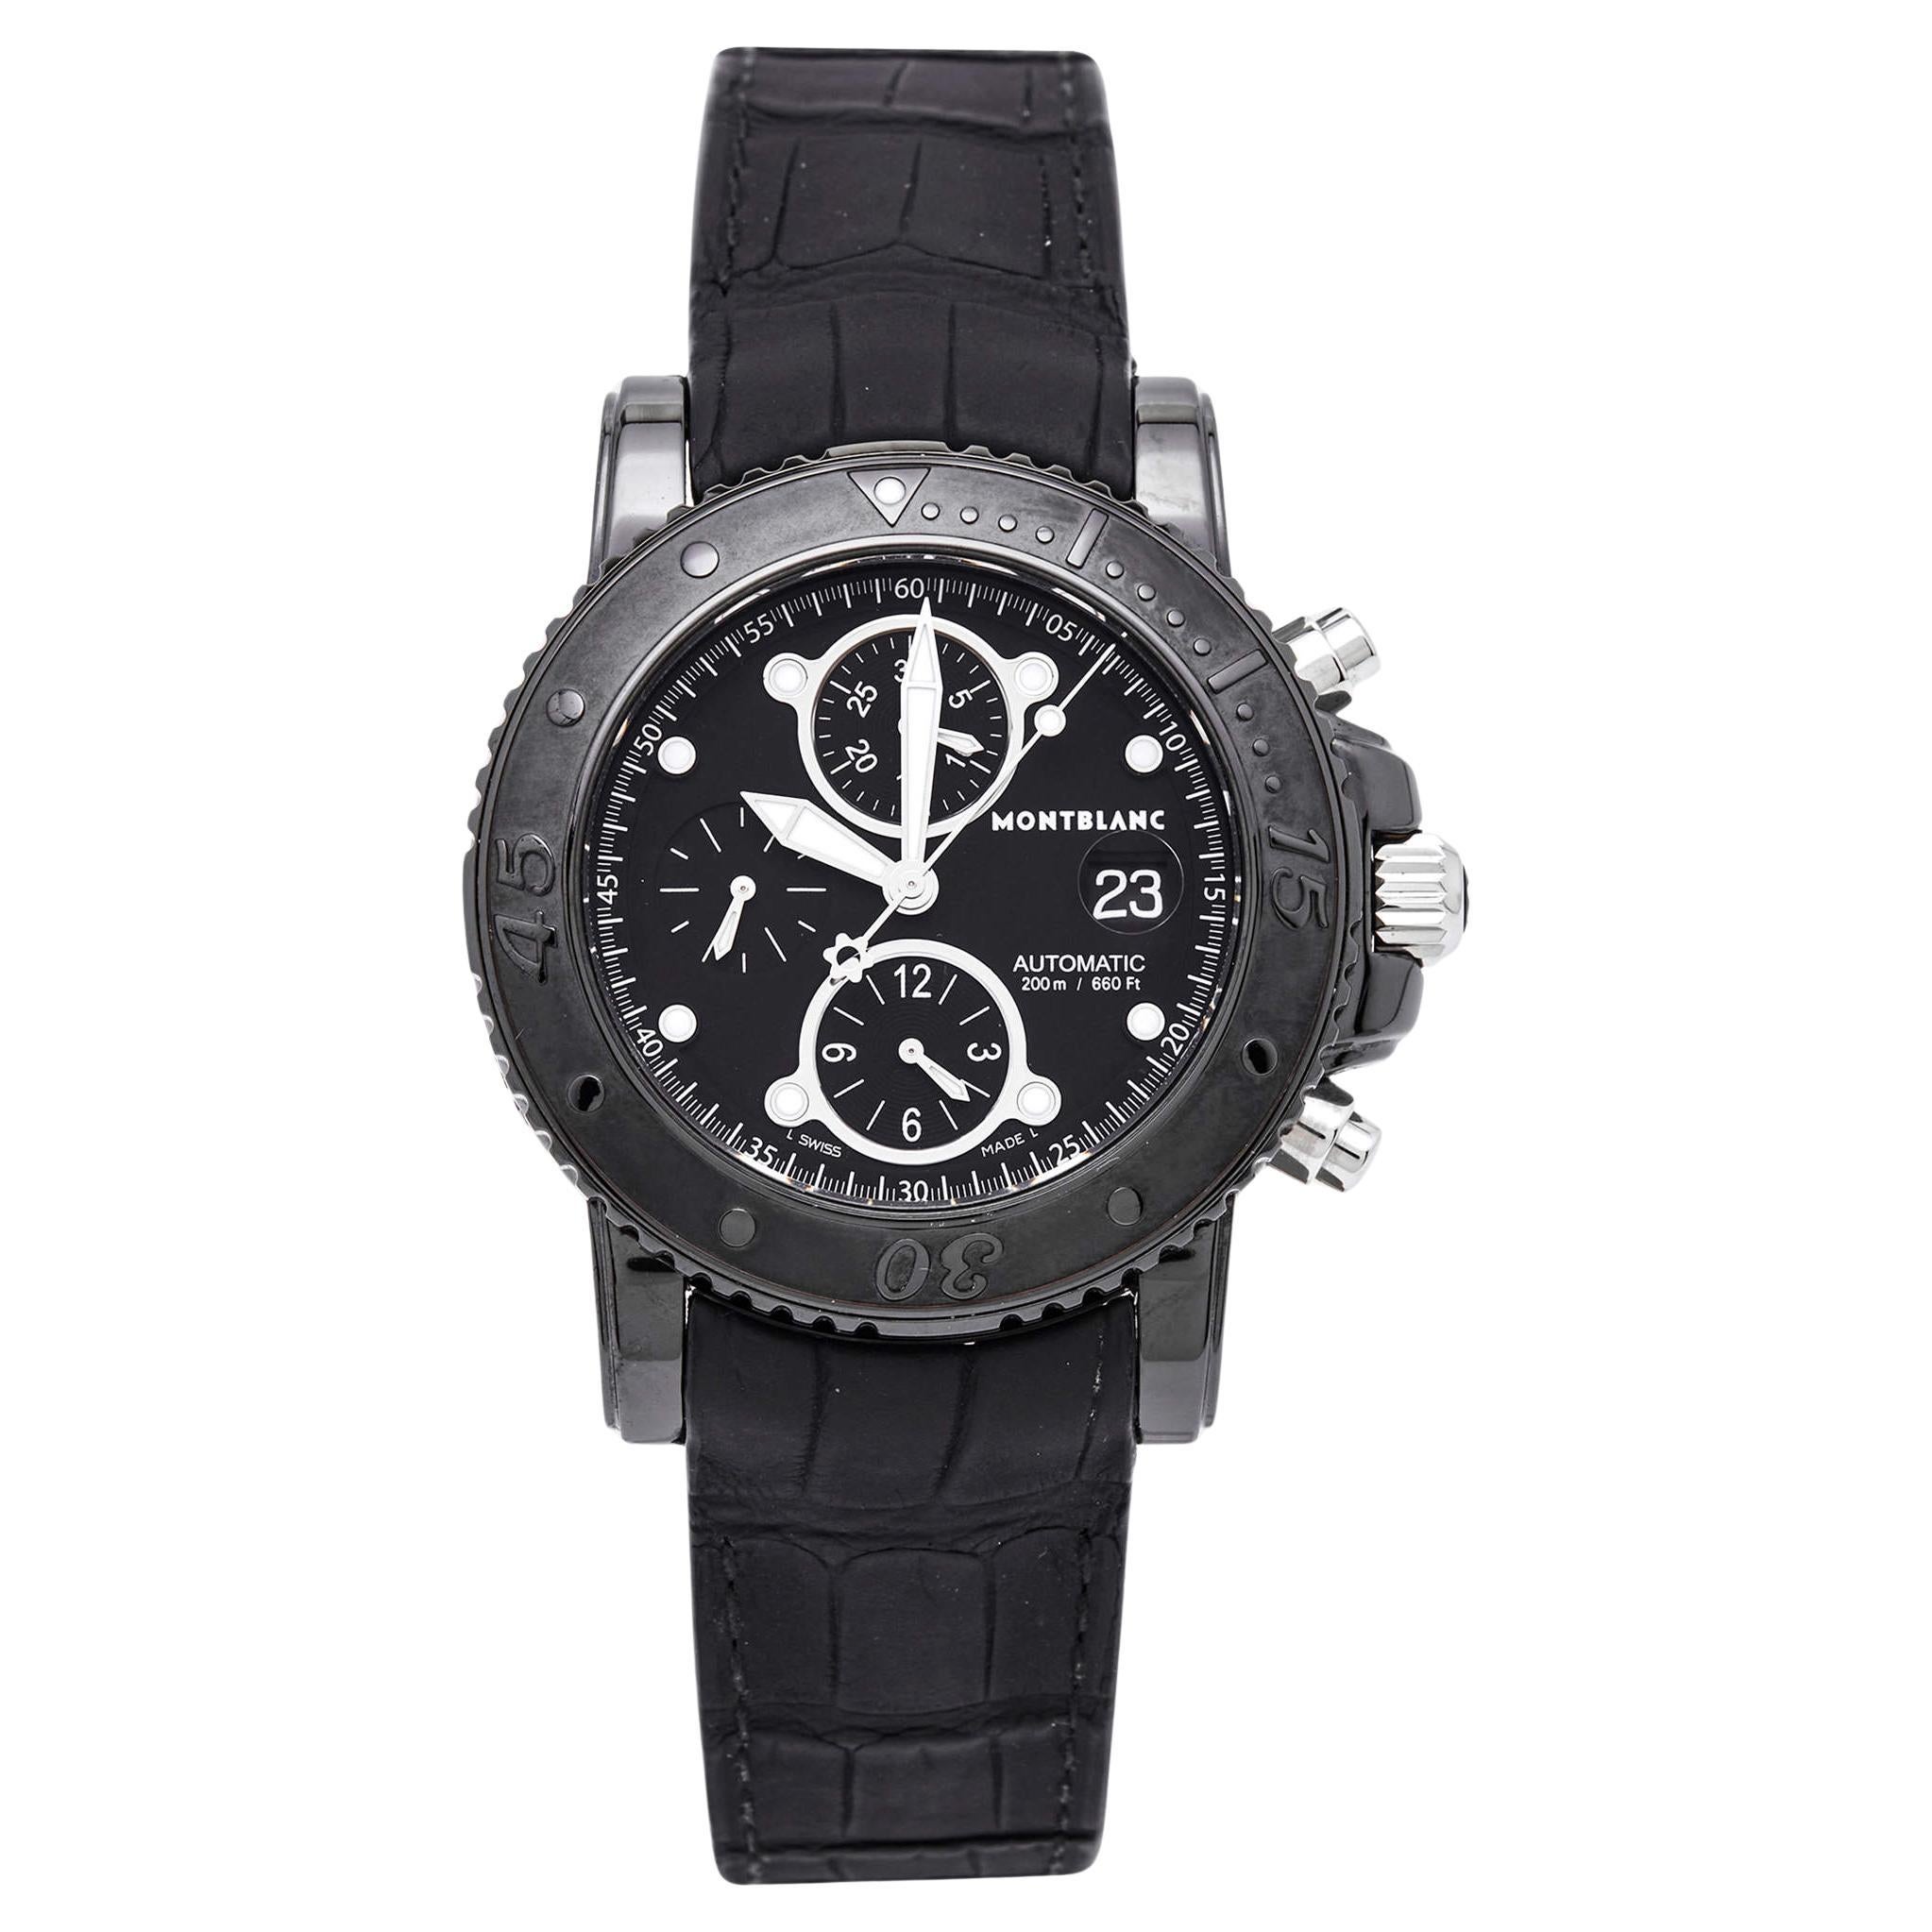 Montblanc Black PVD Coated Alligator Leather Sport 104279 Men's Wristwatch 44 mm For Sale